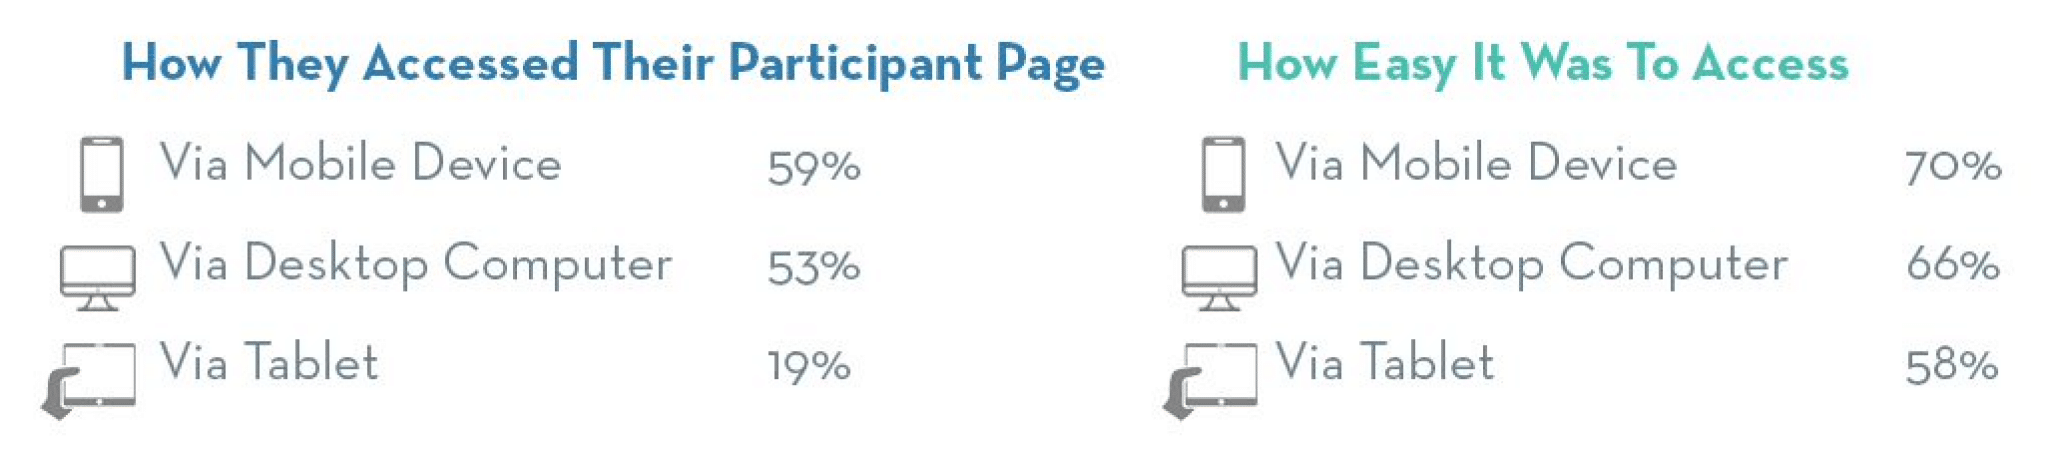 How peer-to-peer participants access their participant page and how easy it is for them according to the OneCause Social Fundraiser study